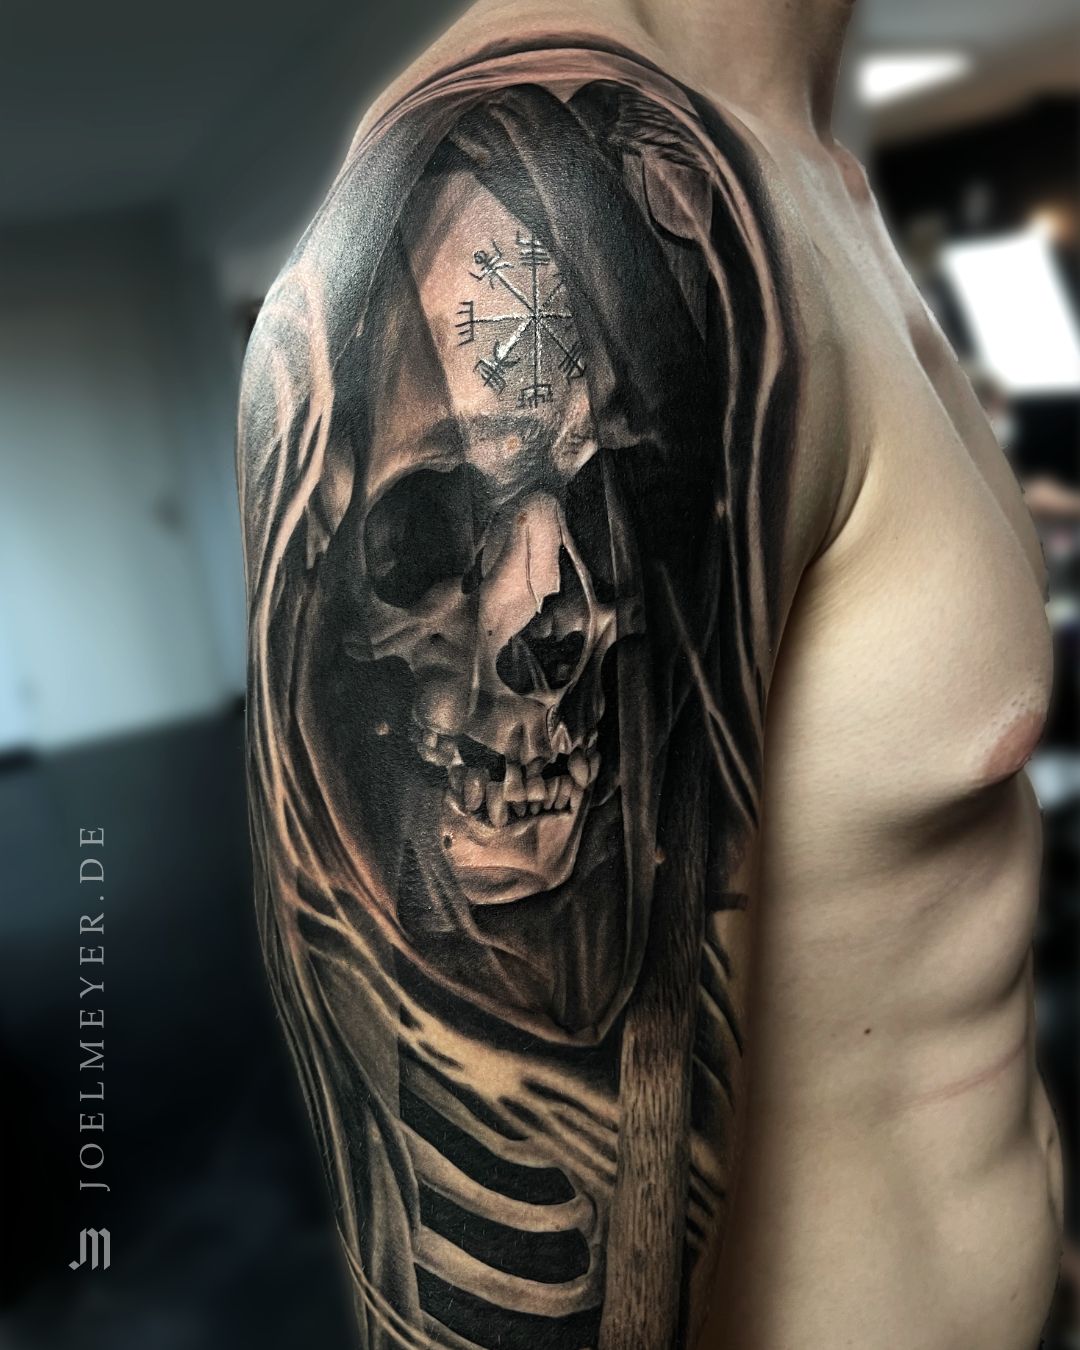 Tattoo of a grim reaper with scythe vintage Vector Image